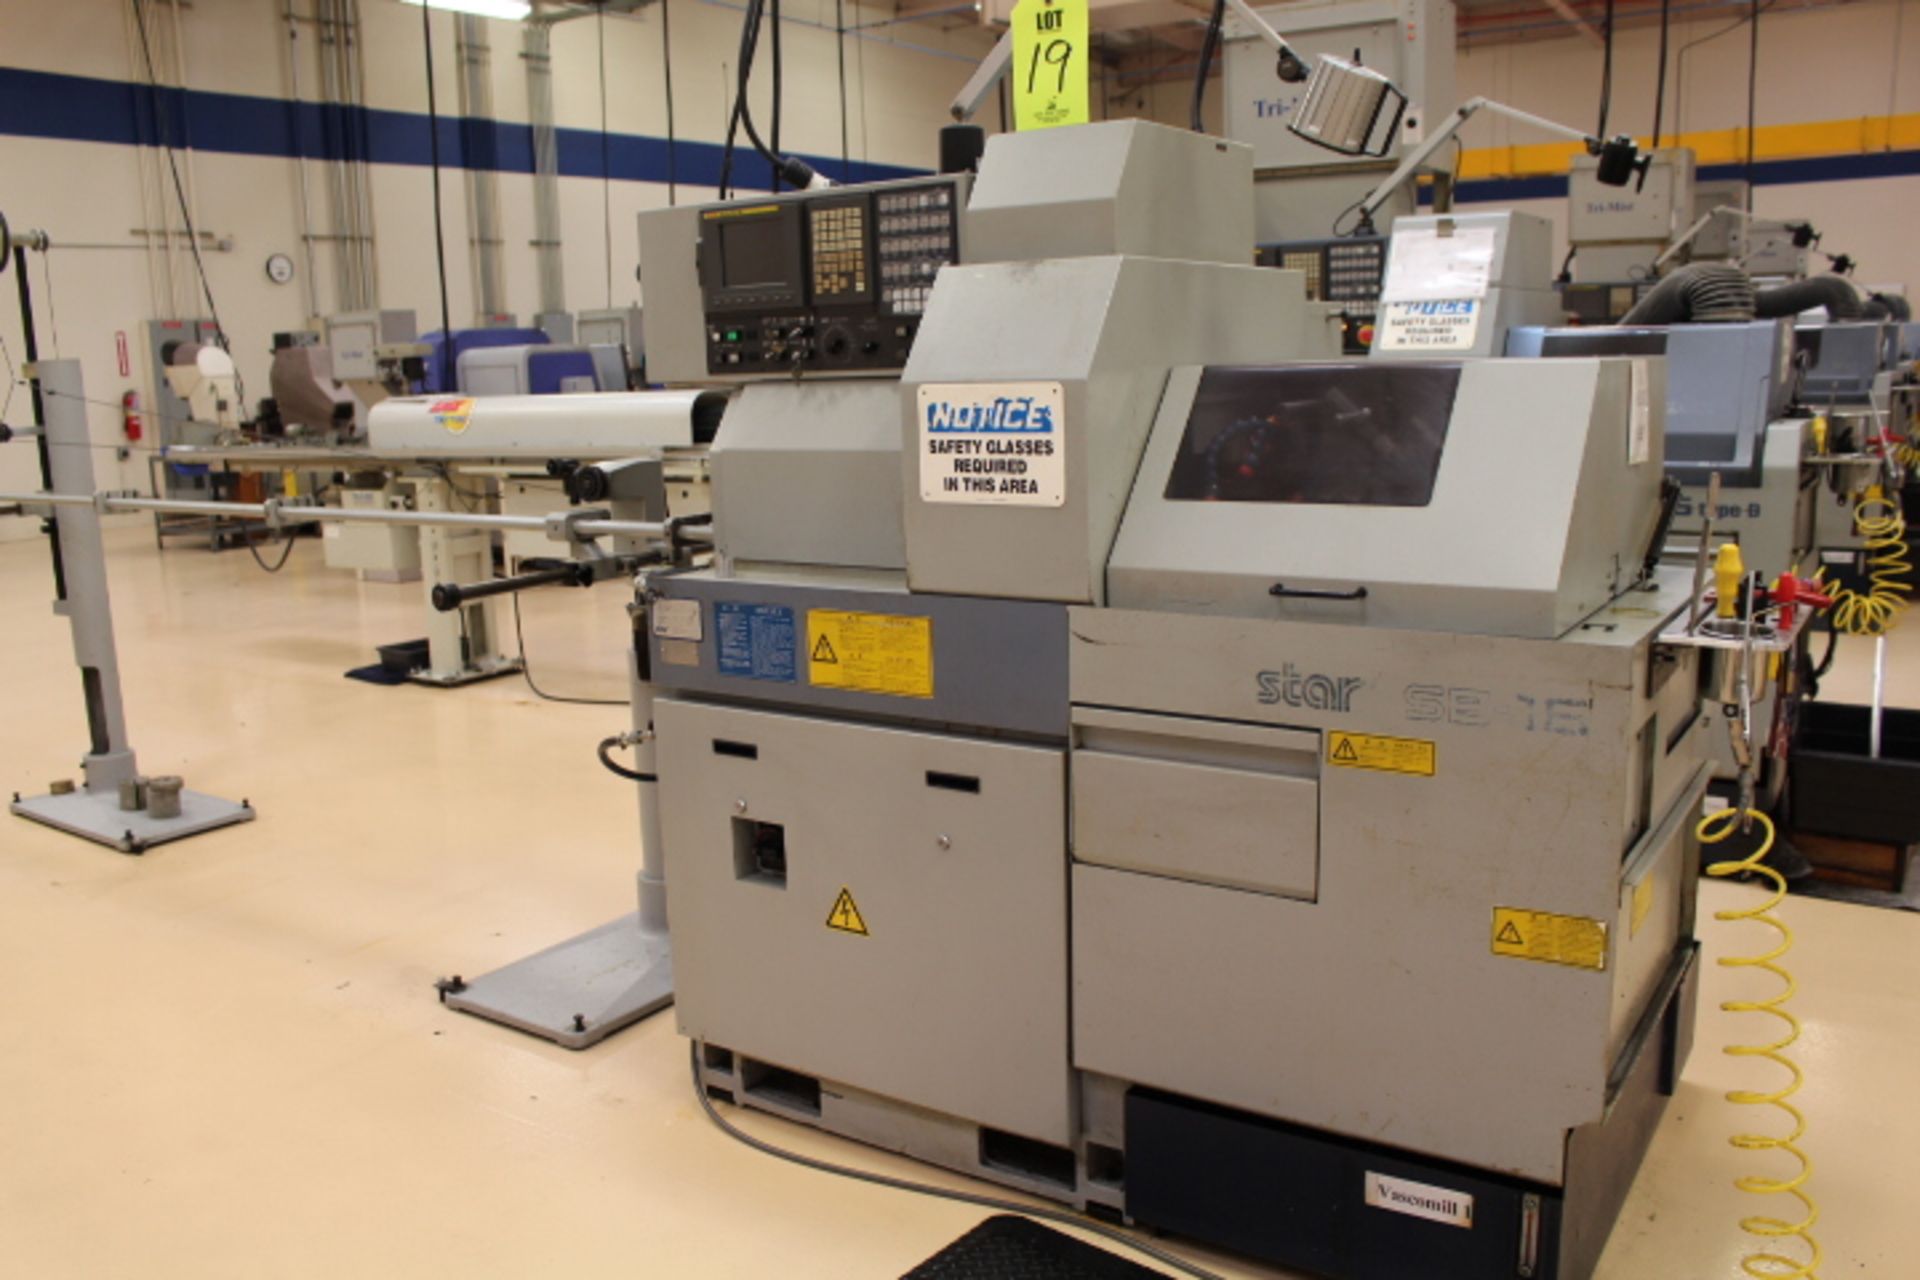 STAR SB-16 CNC 5-AXIS SWISS TYPE CNC LATHE, FANUC SERIES 18i-TB CONTROL, 4-SPINDLE ATTACHMENT,